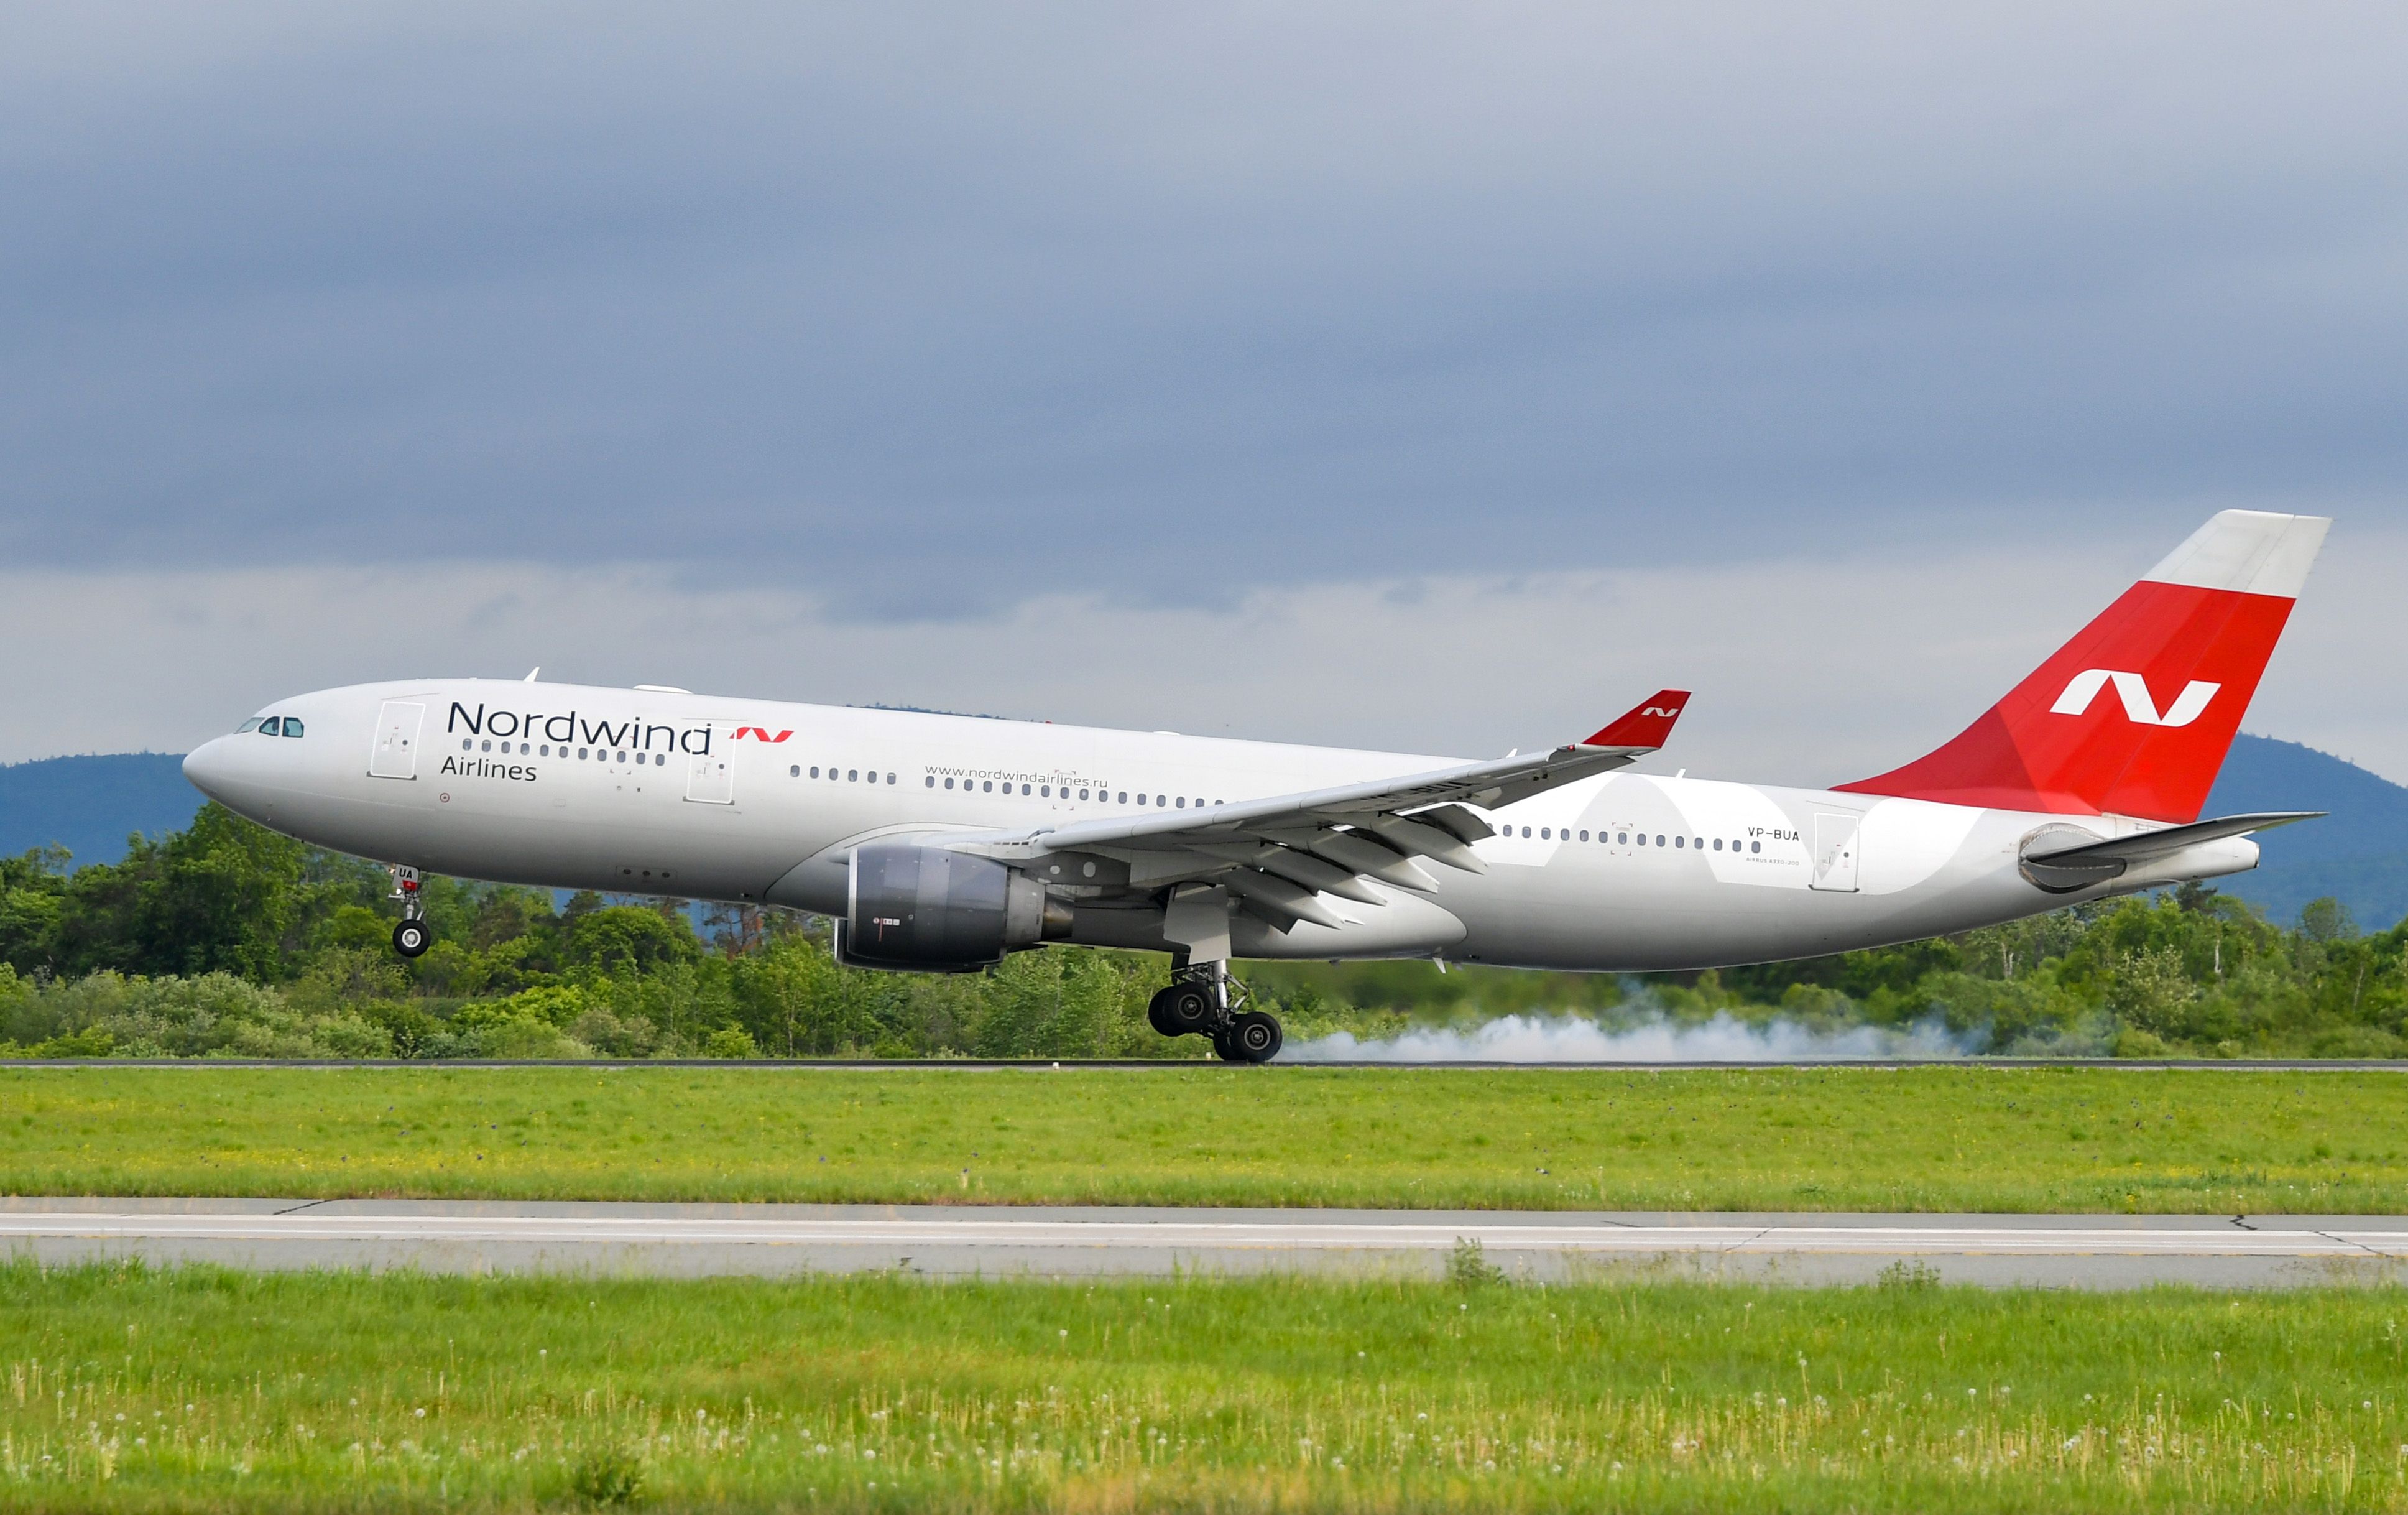 A Nordwind Airlines aircraft landing. 